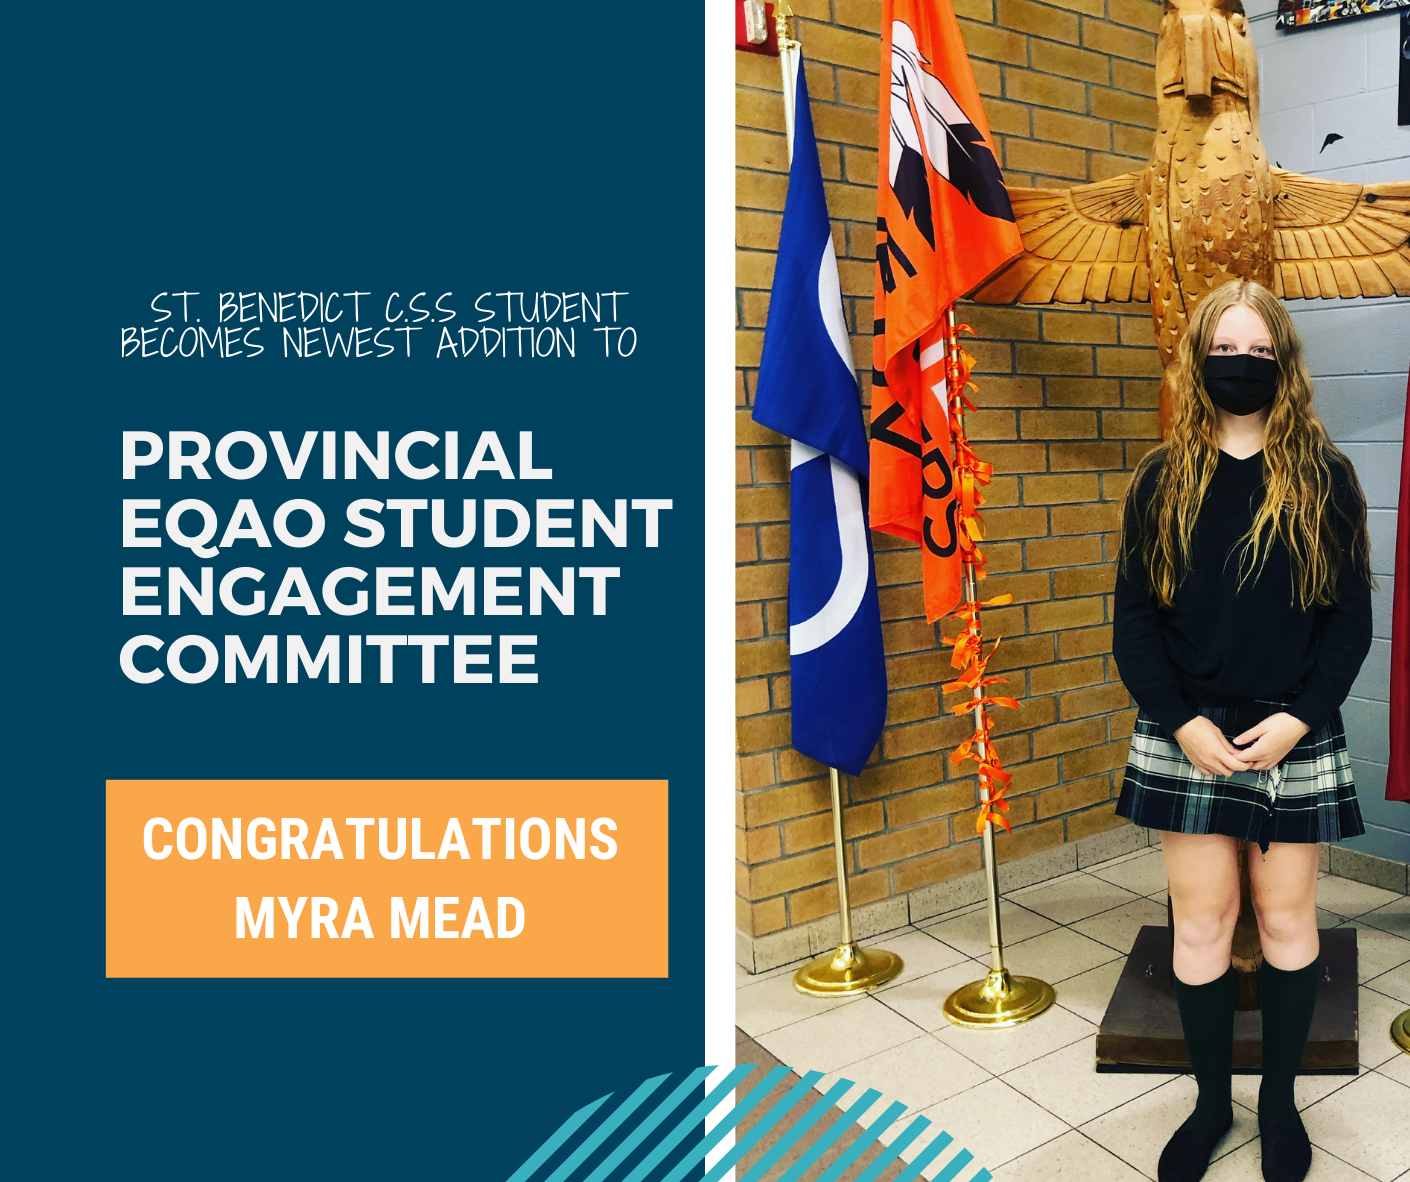 St. Benedict Student Becomes Newest Addition to the Provincial EQAO Student Engagement Committee